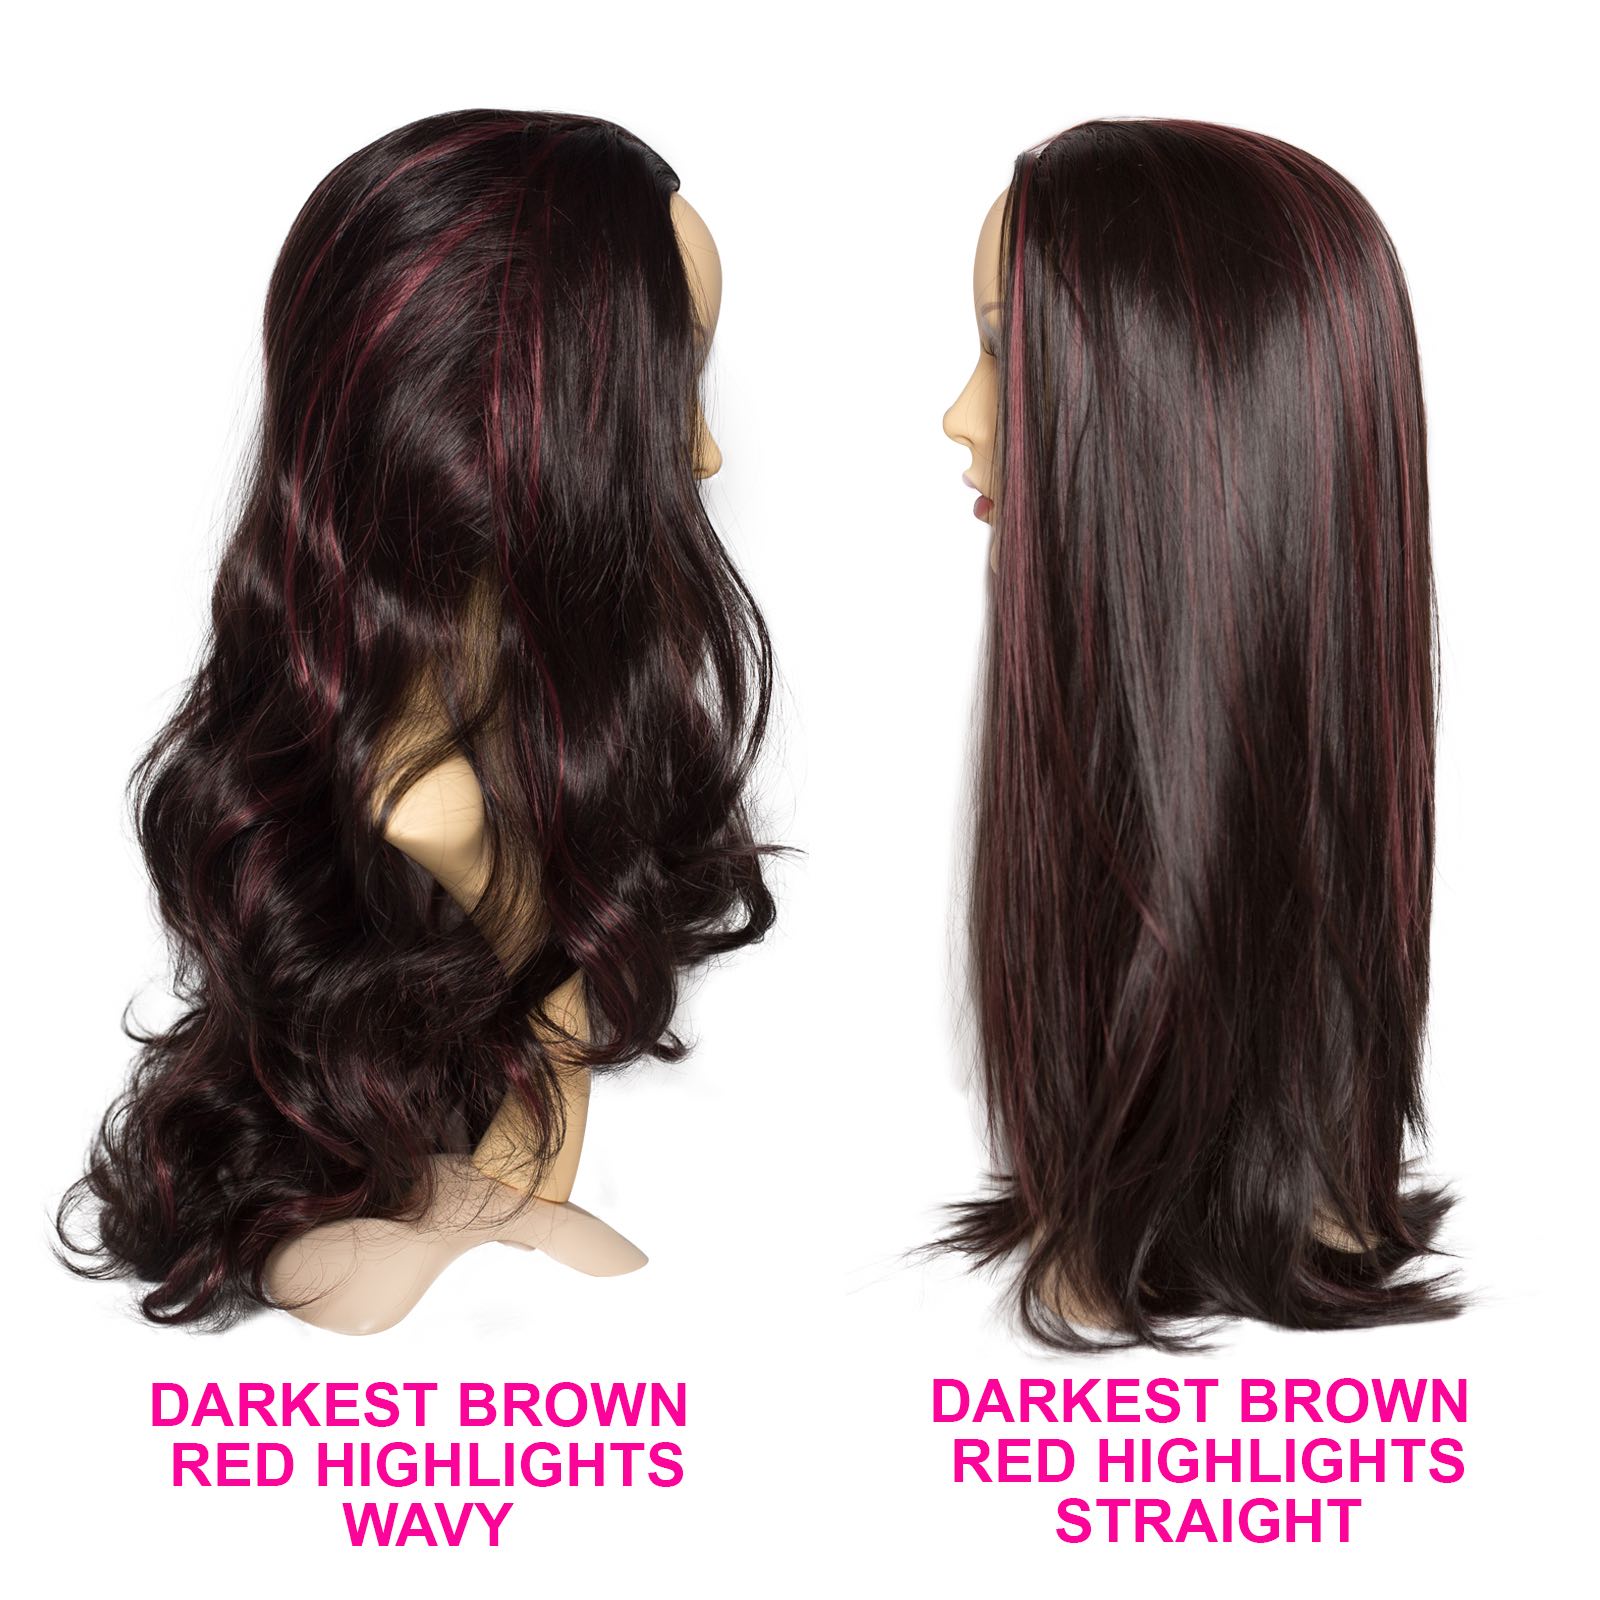 Details About Ladies 3 4 Half Wig Darkest Brown Red Highlights Straight 22 Synthetic Hair